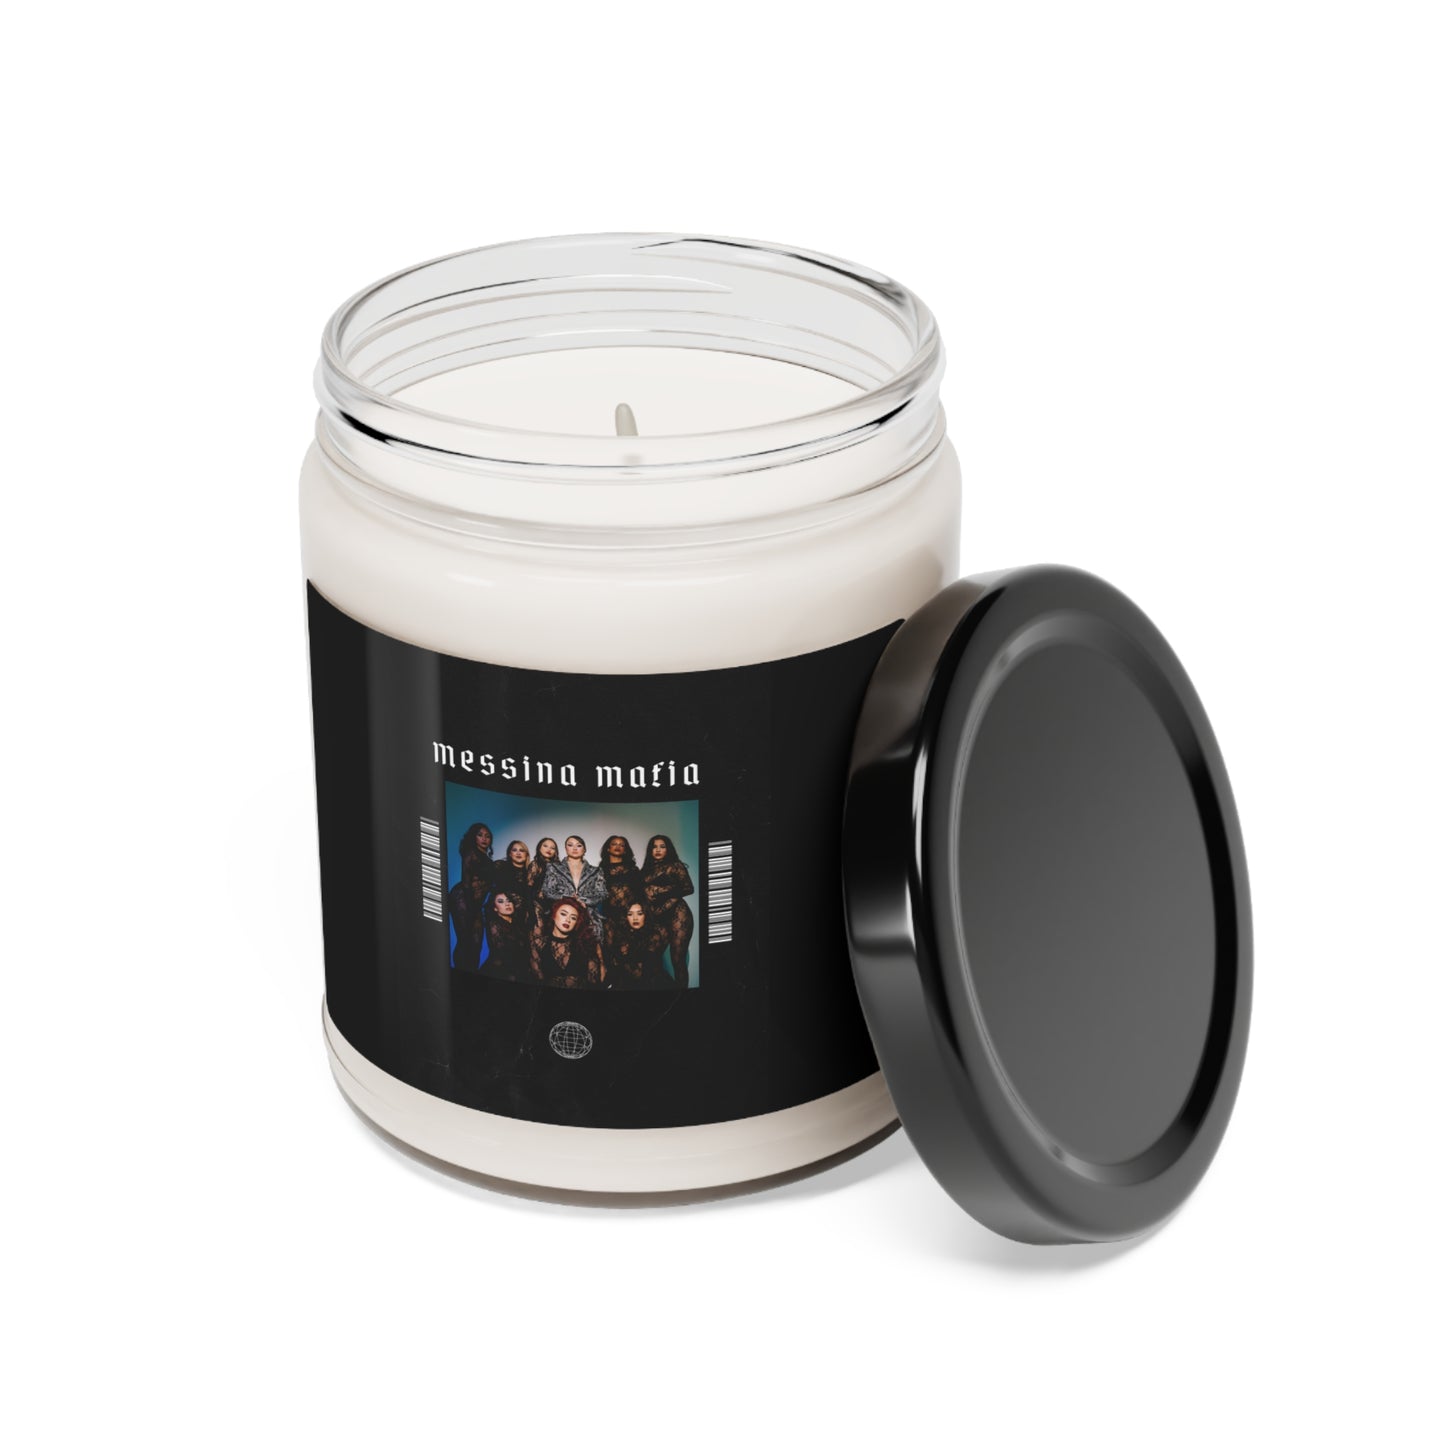 "Messina Mafia, Family Meeting"  || Scented Soy Candle, 9oz